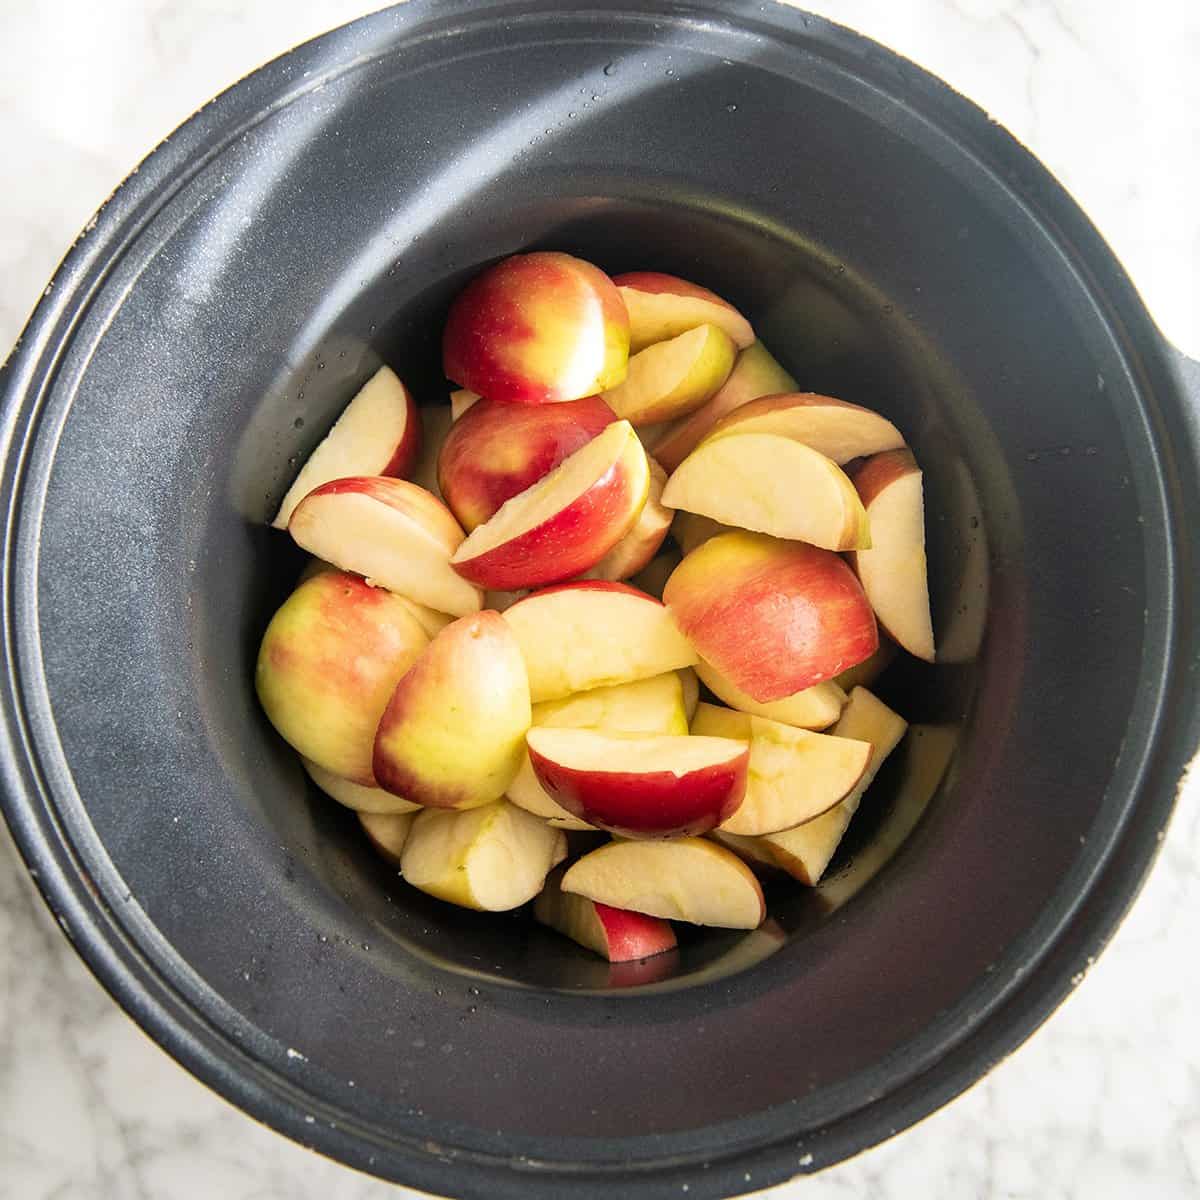 How to Make Applesauce - apples in a crockpot before cooking